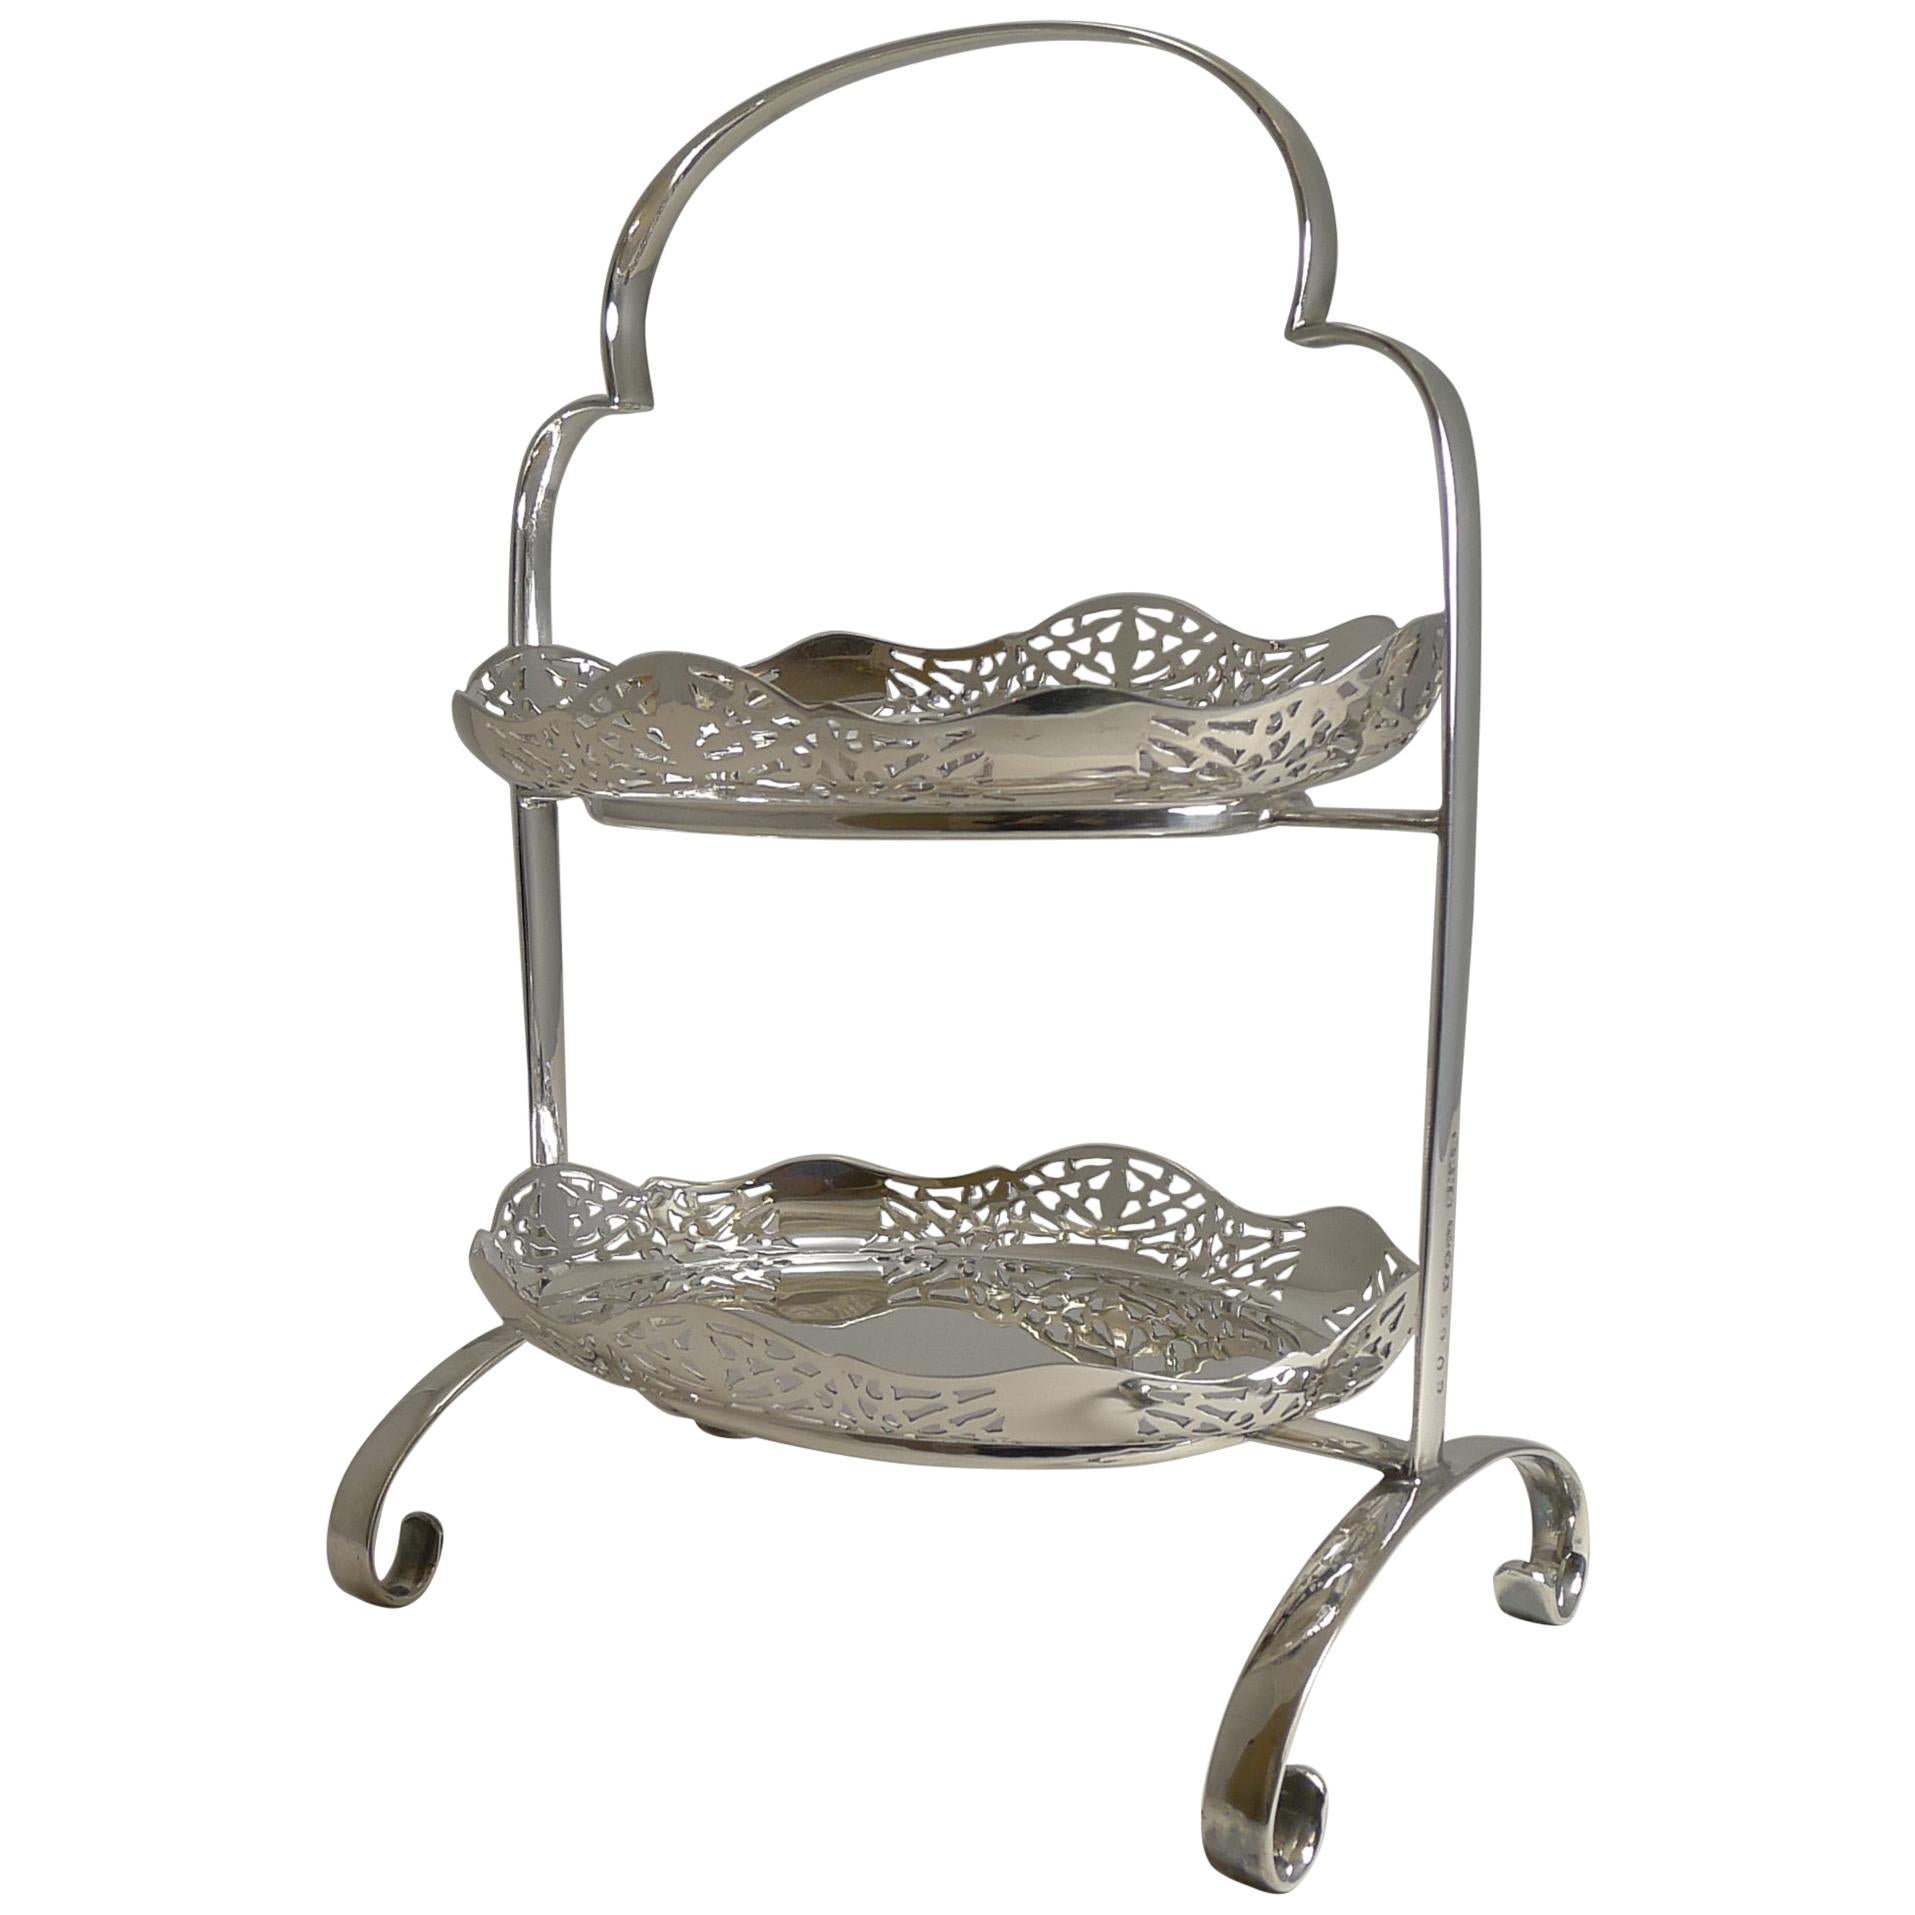 Antique English Cake Stand in Silver Plate, circa 1900